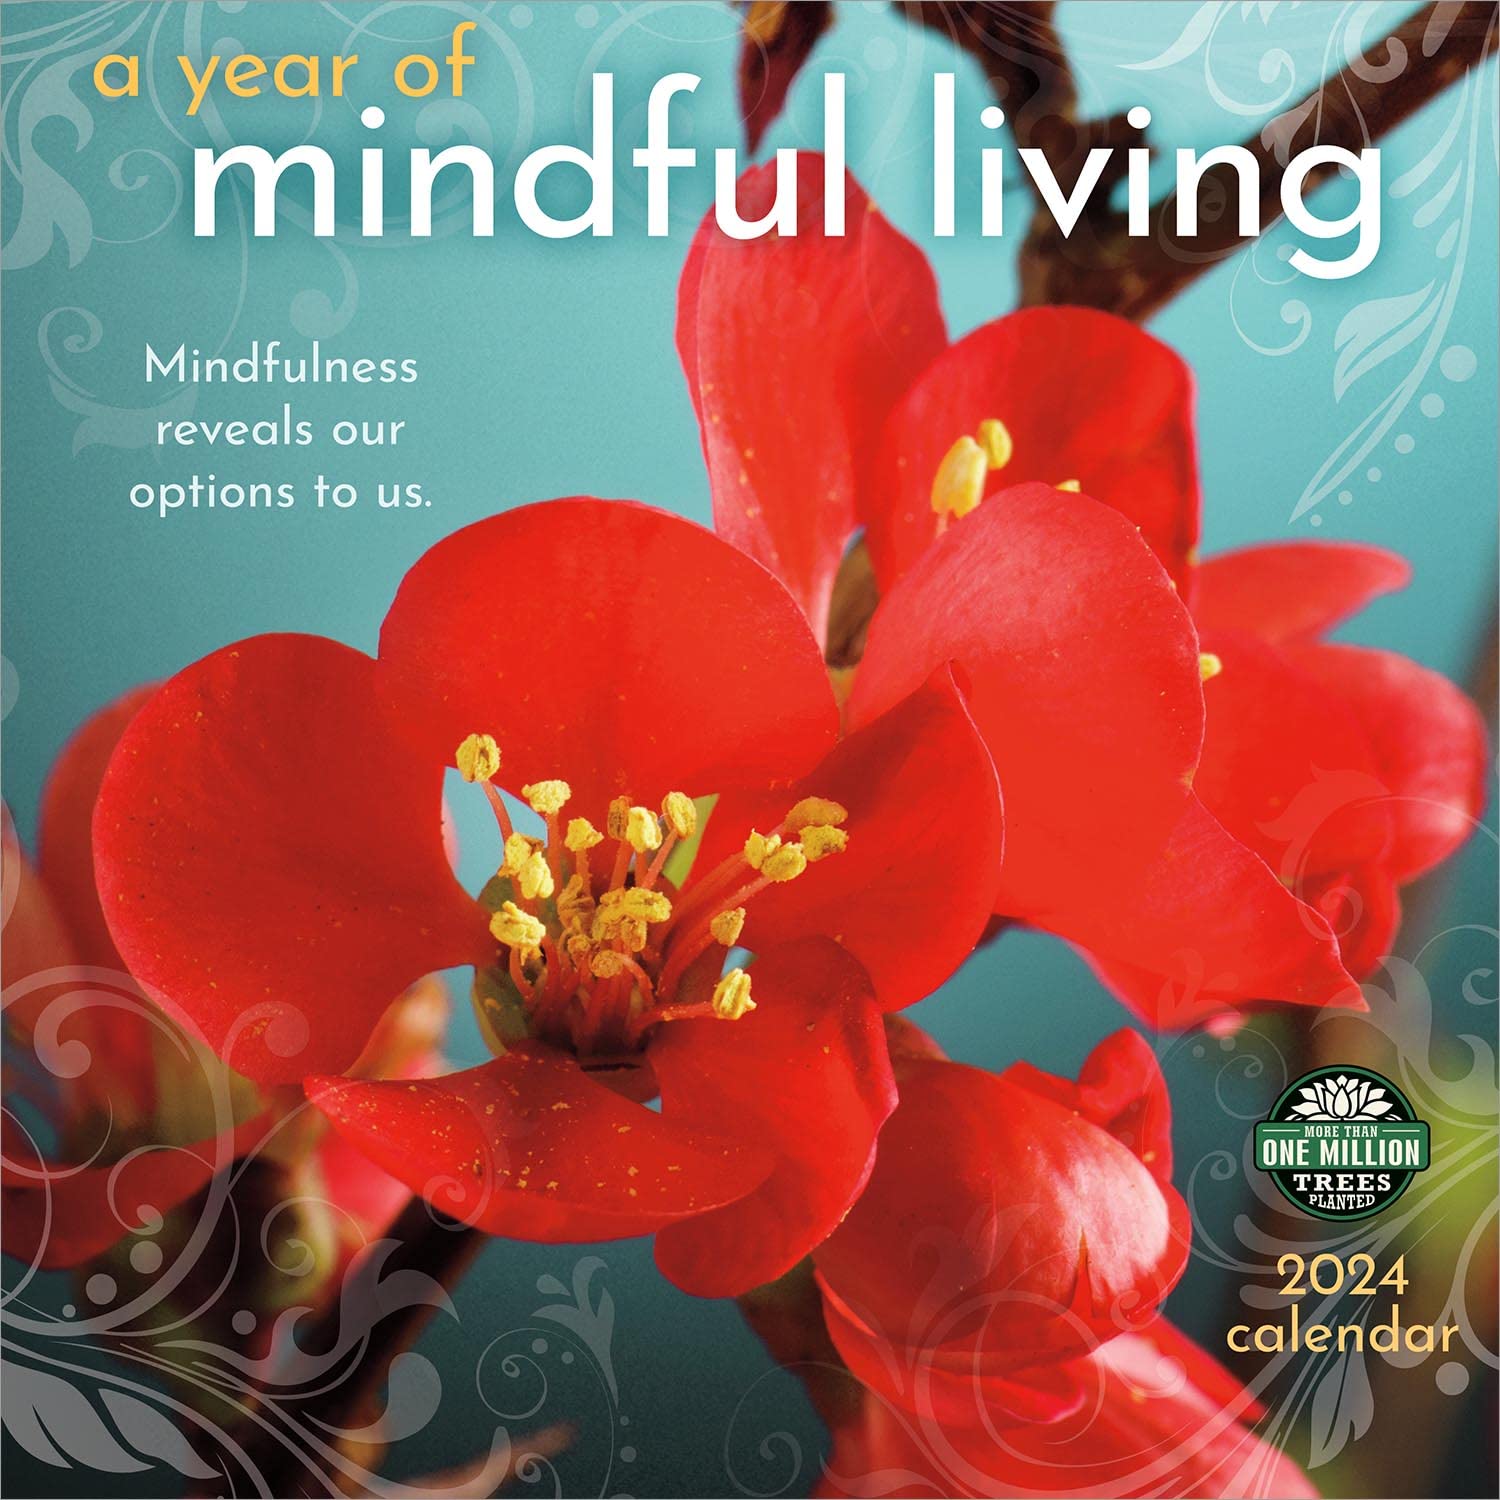 mindful-living-a-year-of-wall-calendar-2024